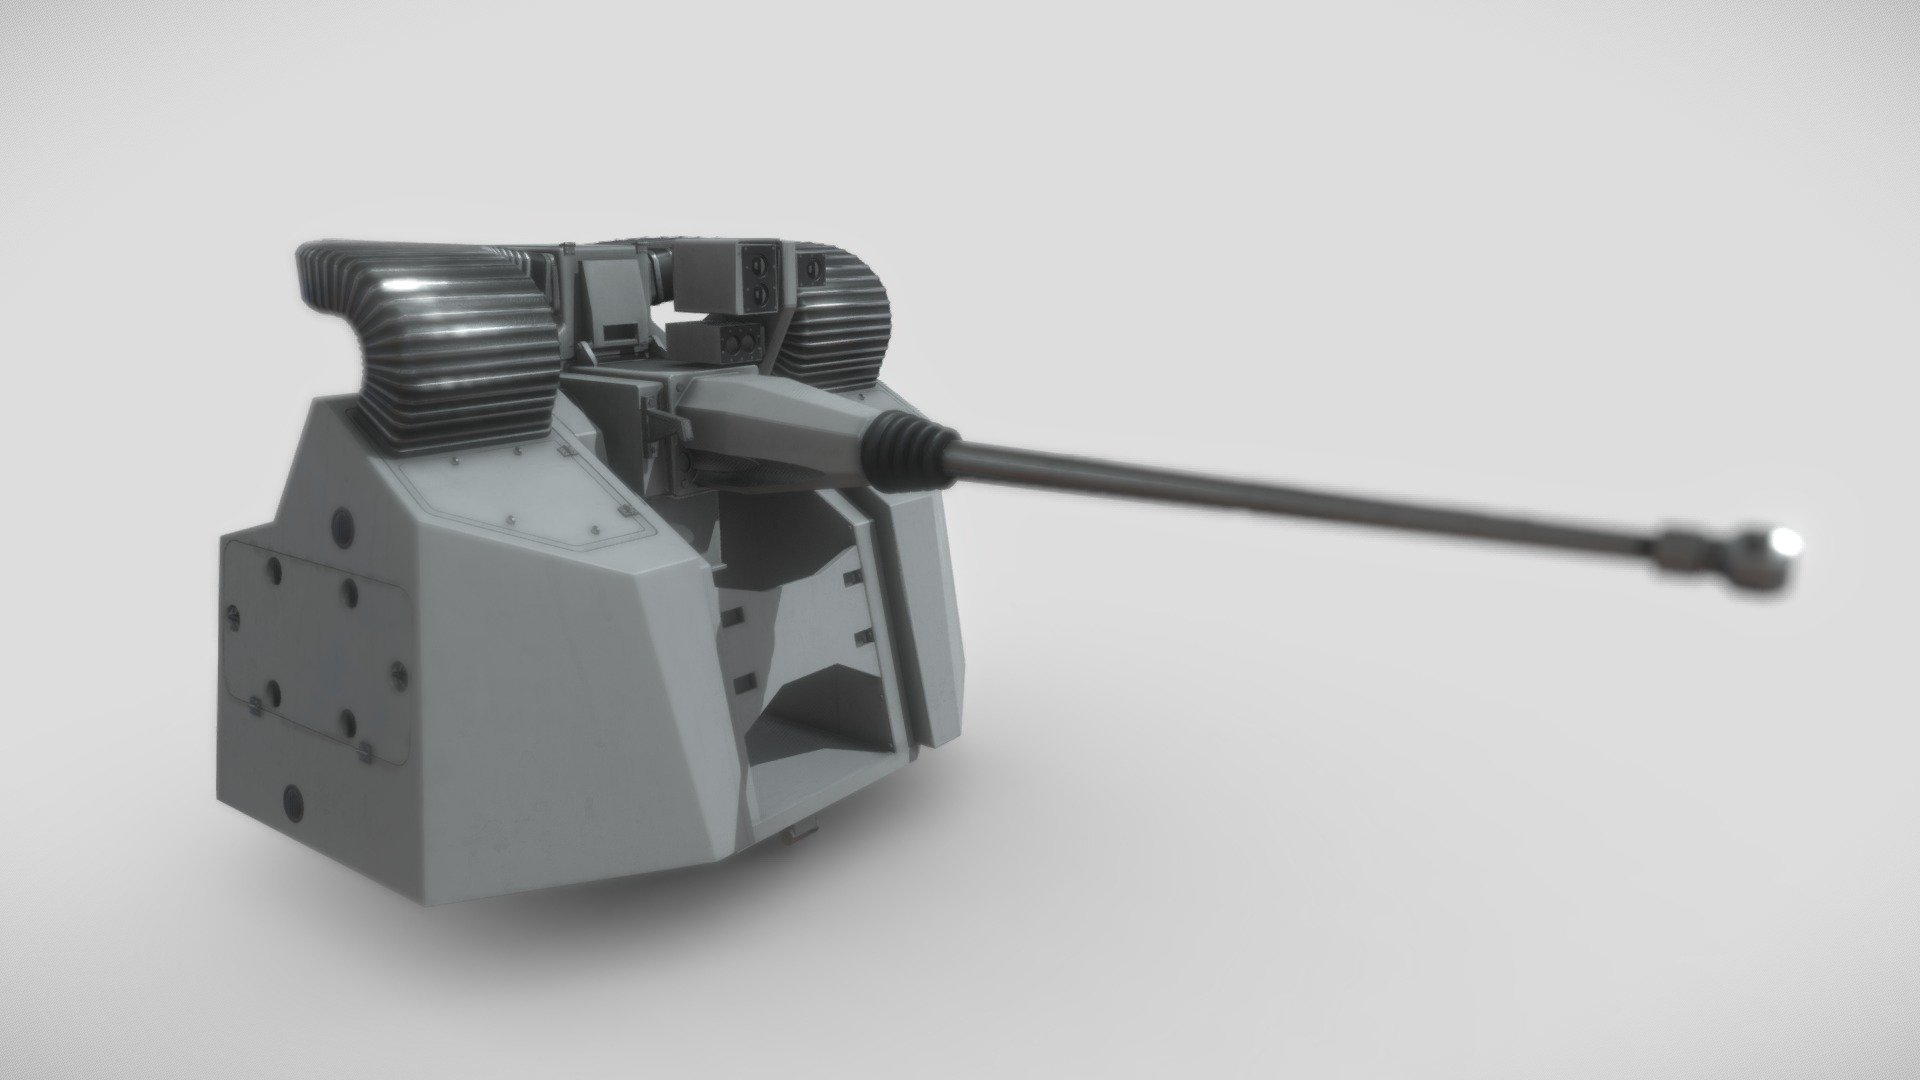 The 30MM MARLIN is an advanced, small caliber, weapon system.

This 3D model was created using 3ds Max, with textures designed in Substance Painter. The model has been meticulously unwrapped and divided into separate parts, enabling the base and turret to rotate seamlessly. If necessary, I am also capable of exporting the textures in various formats suitable for Unity, Unreal Engine, or V-Ray integration 3d model